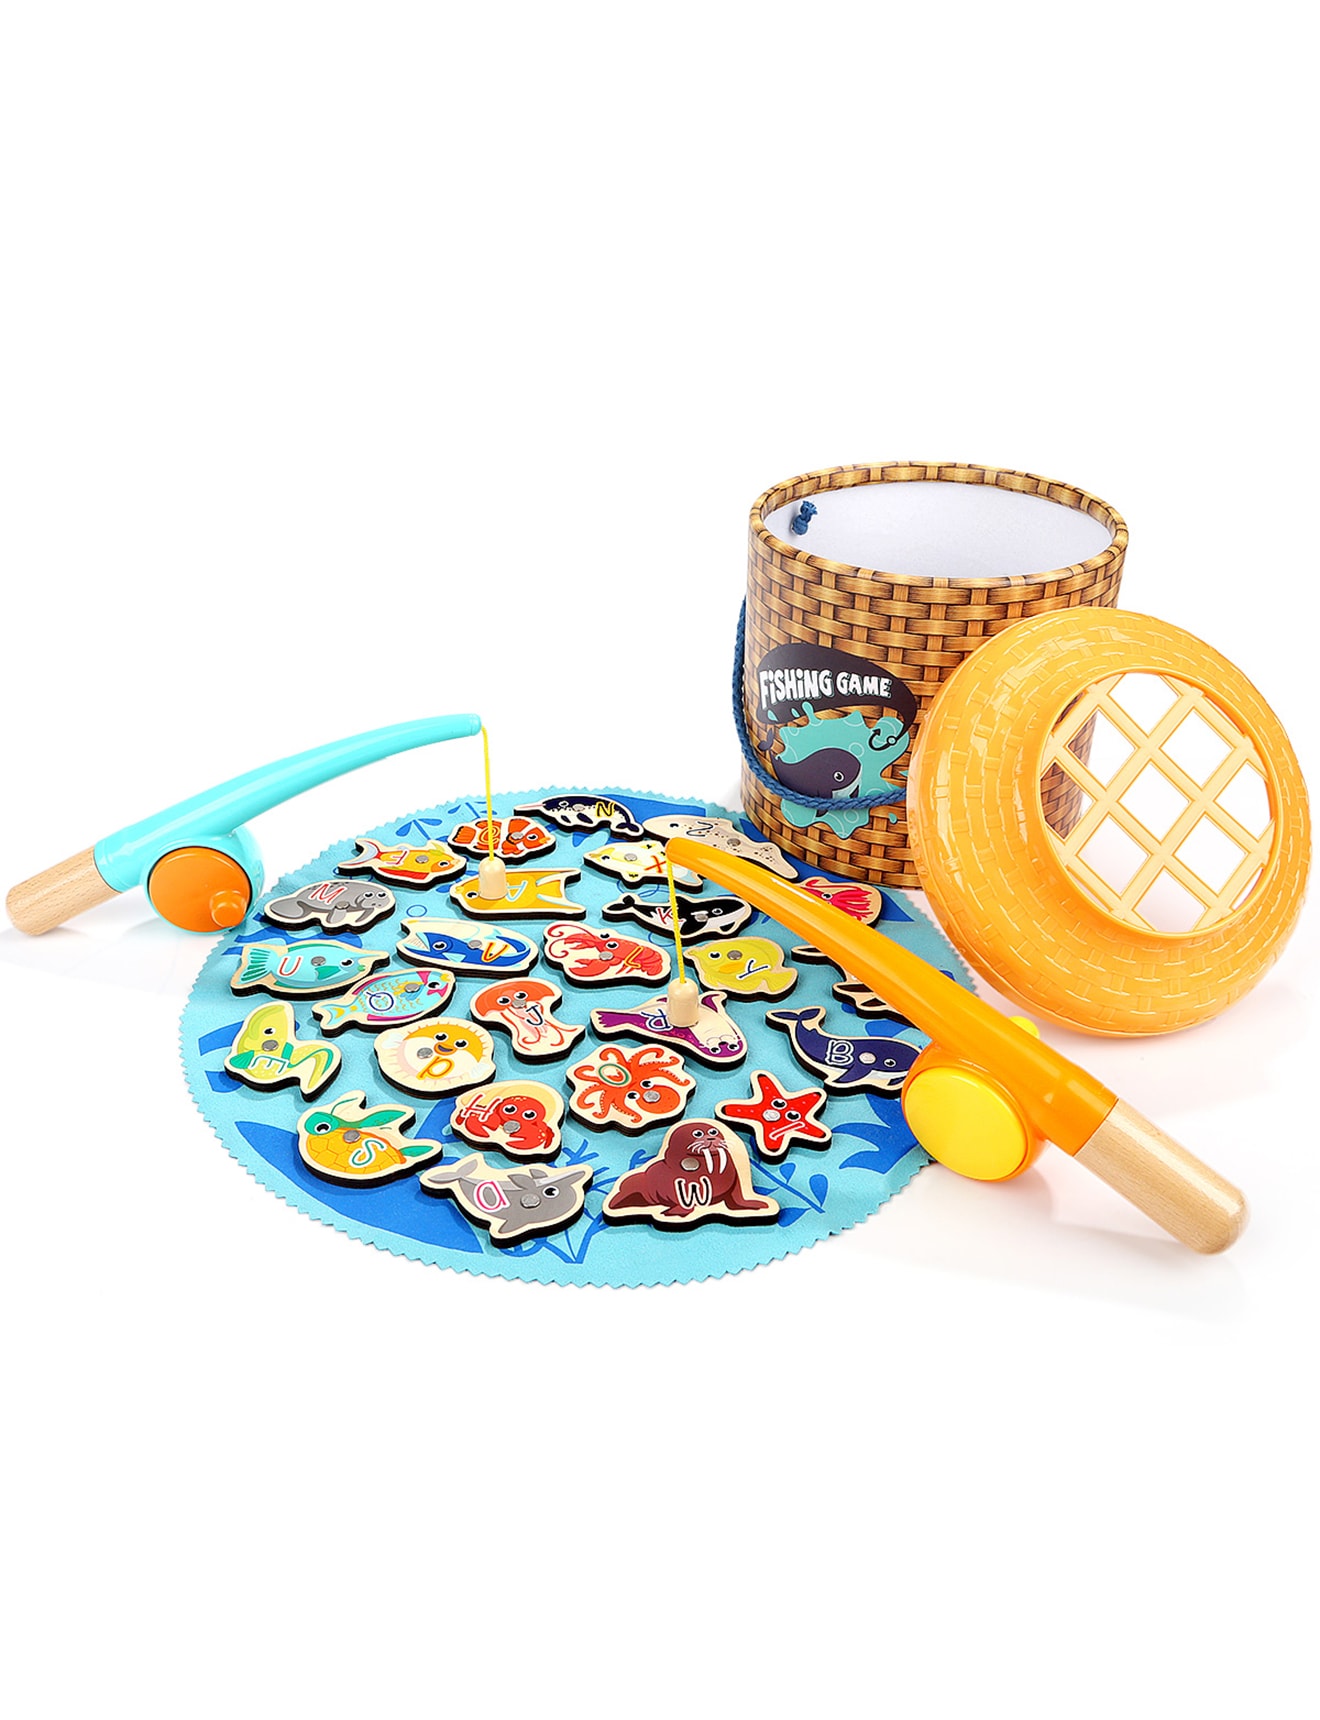 Topbright Magnetic Fishing Game product photo